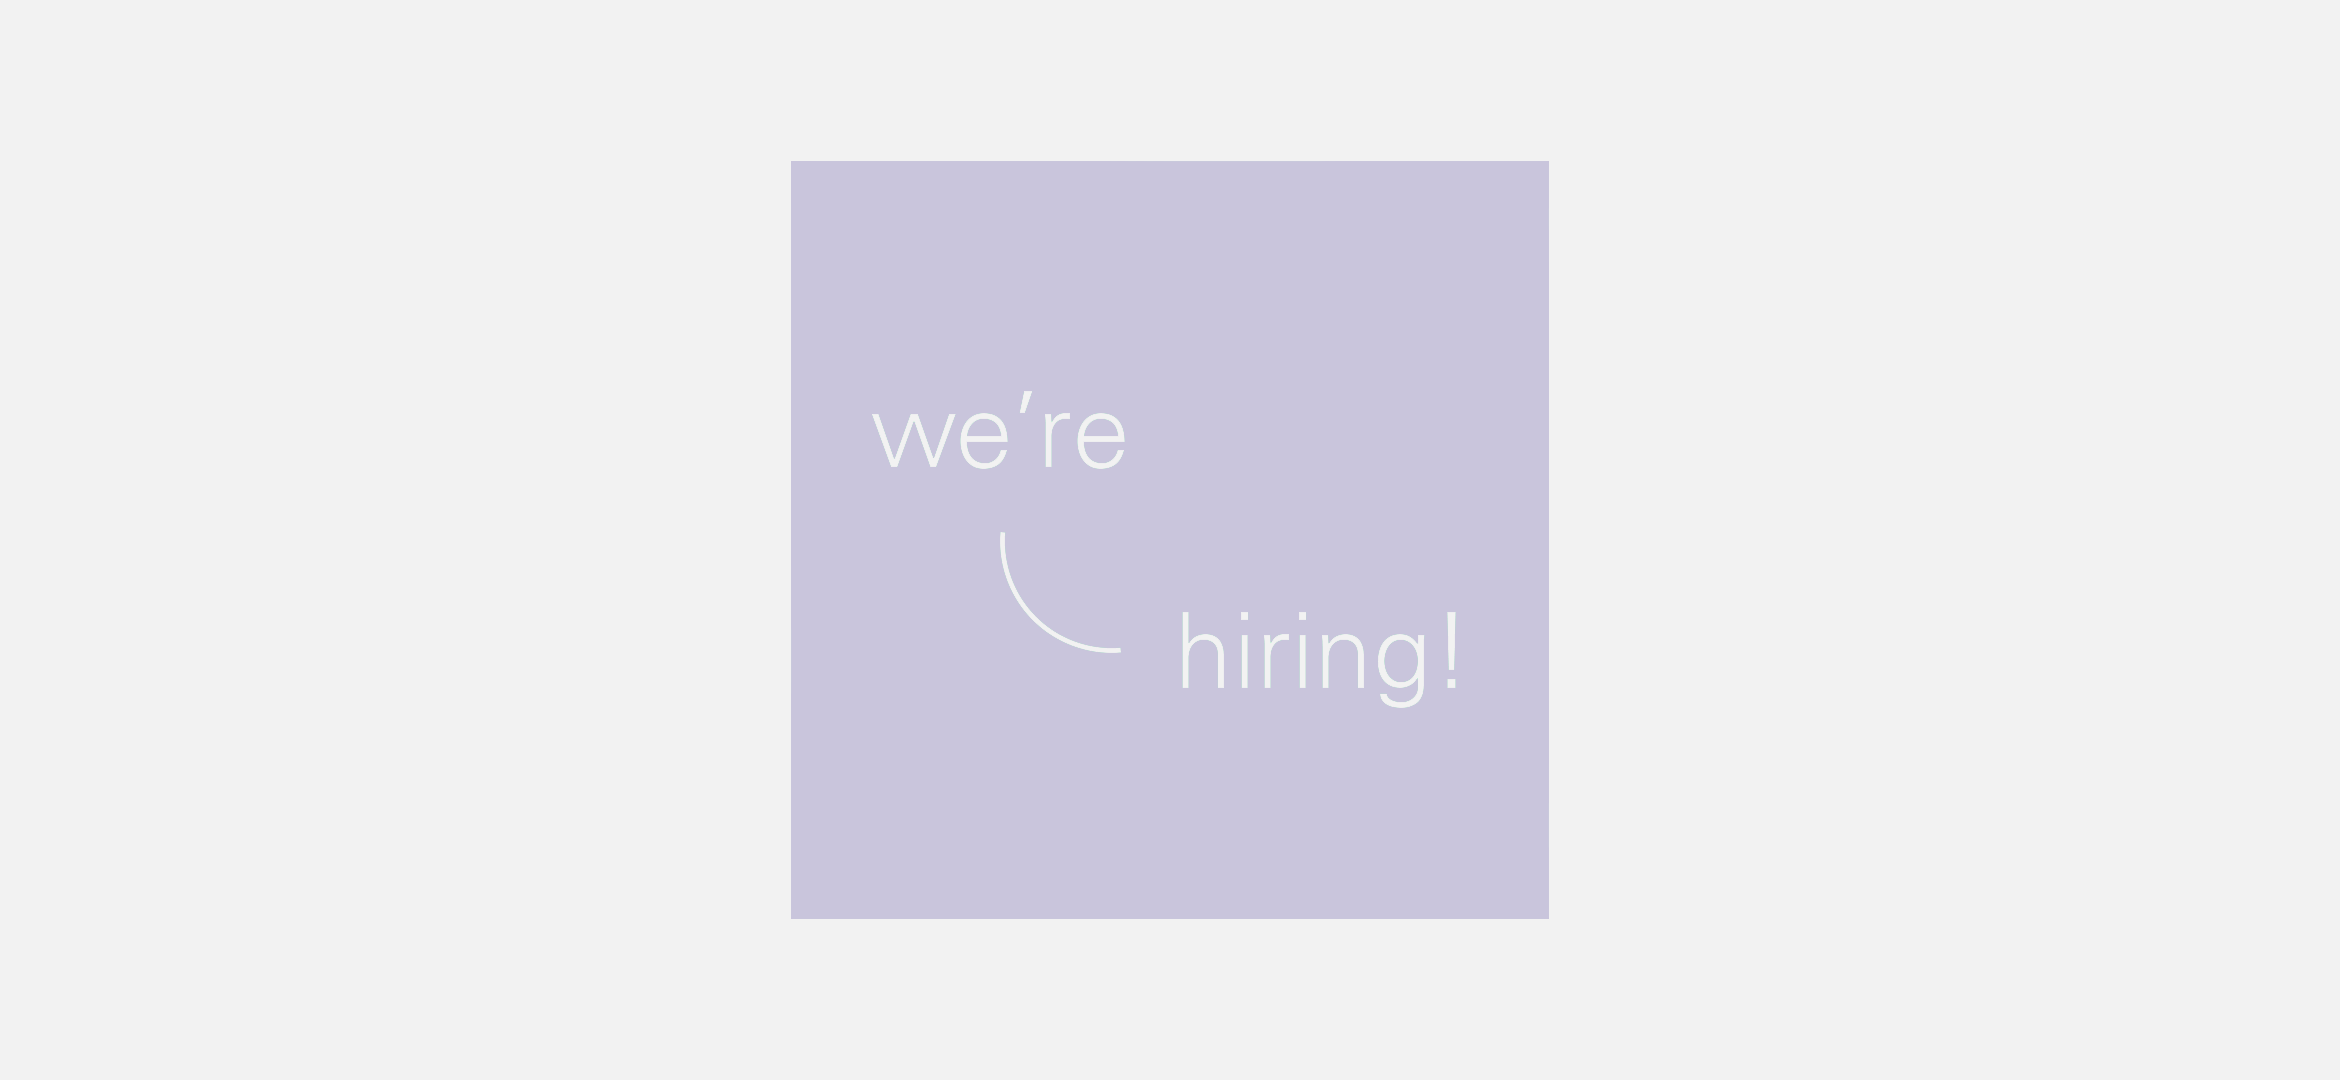 We are hiring! Architect + 3 years post part III experience